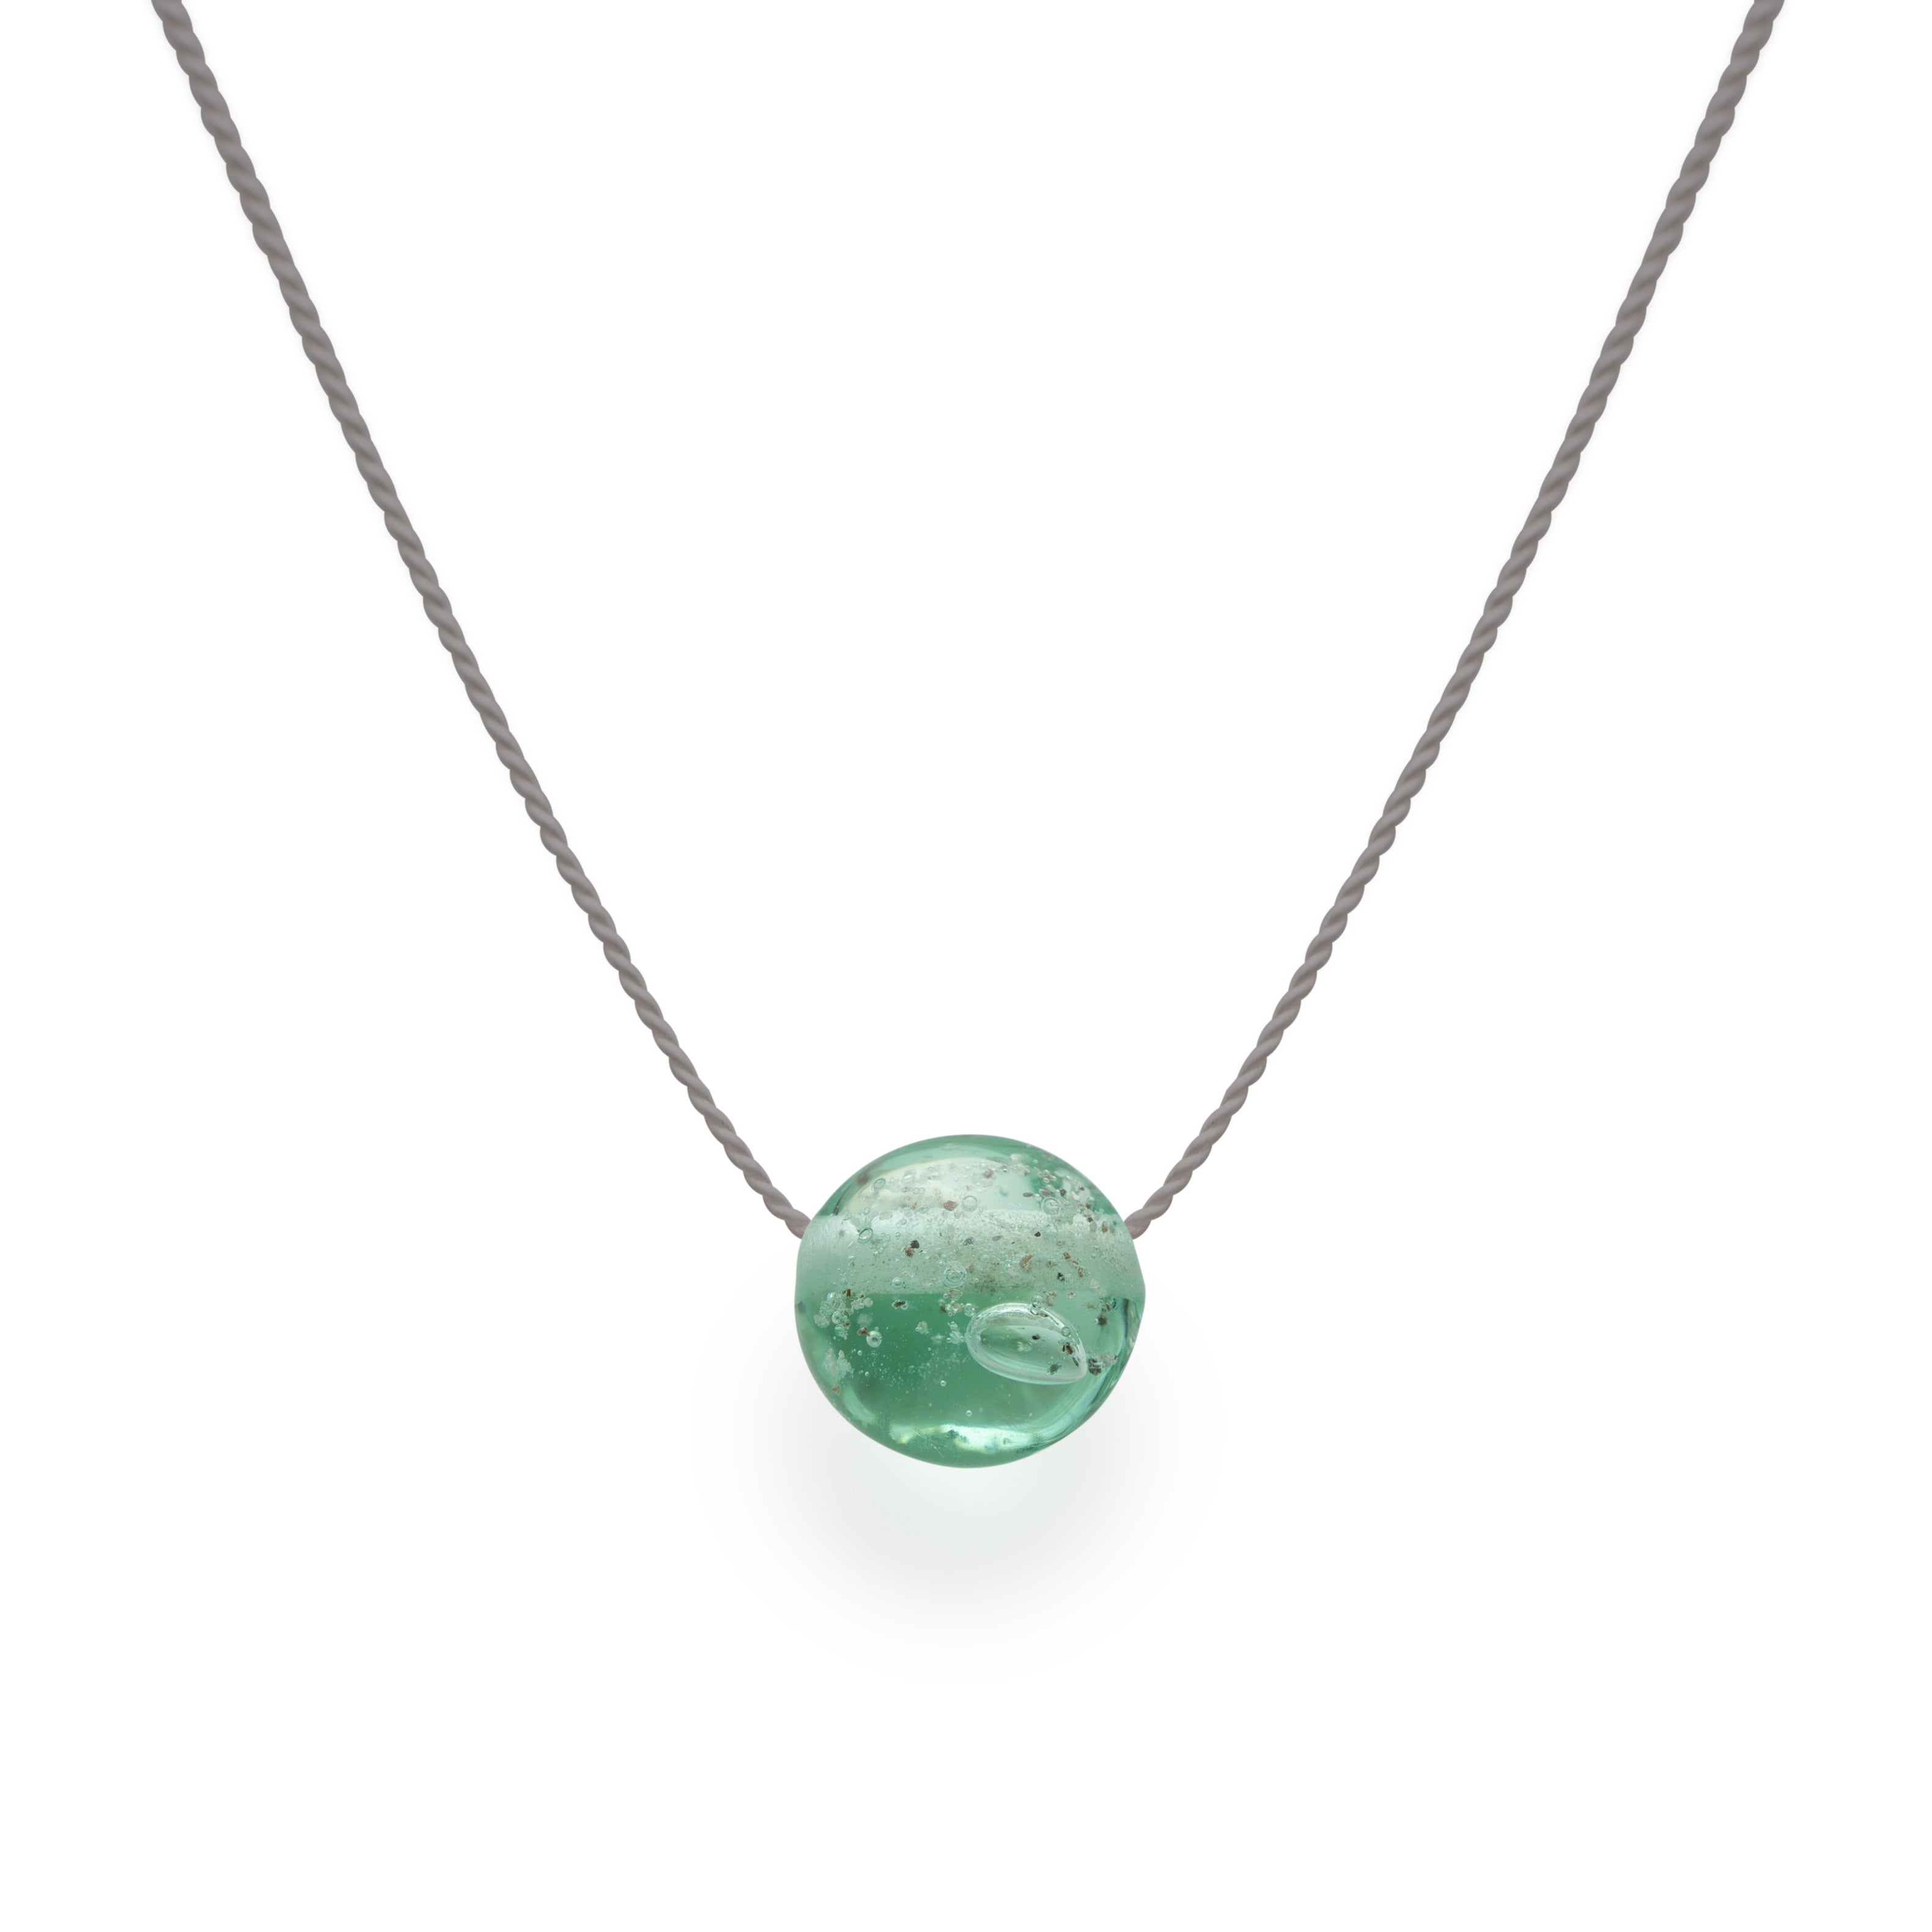 Sand Pebble Necklace - Sea Glass Green